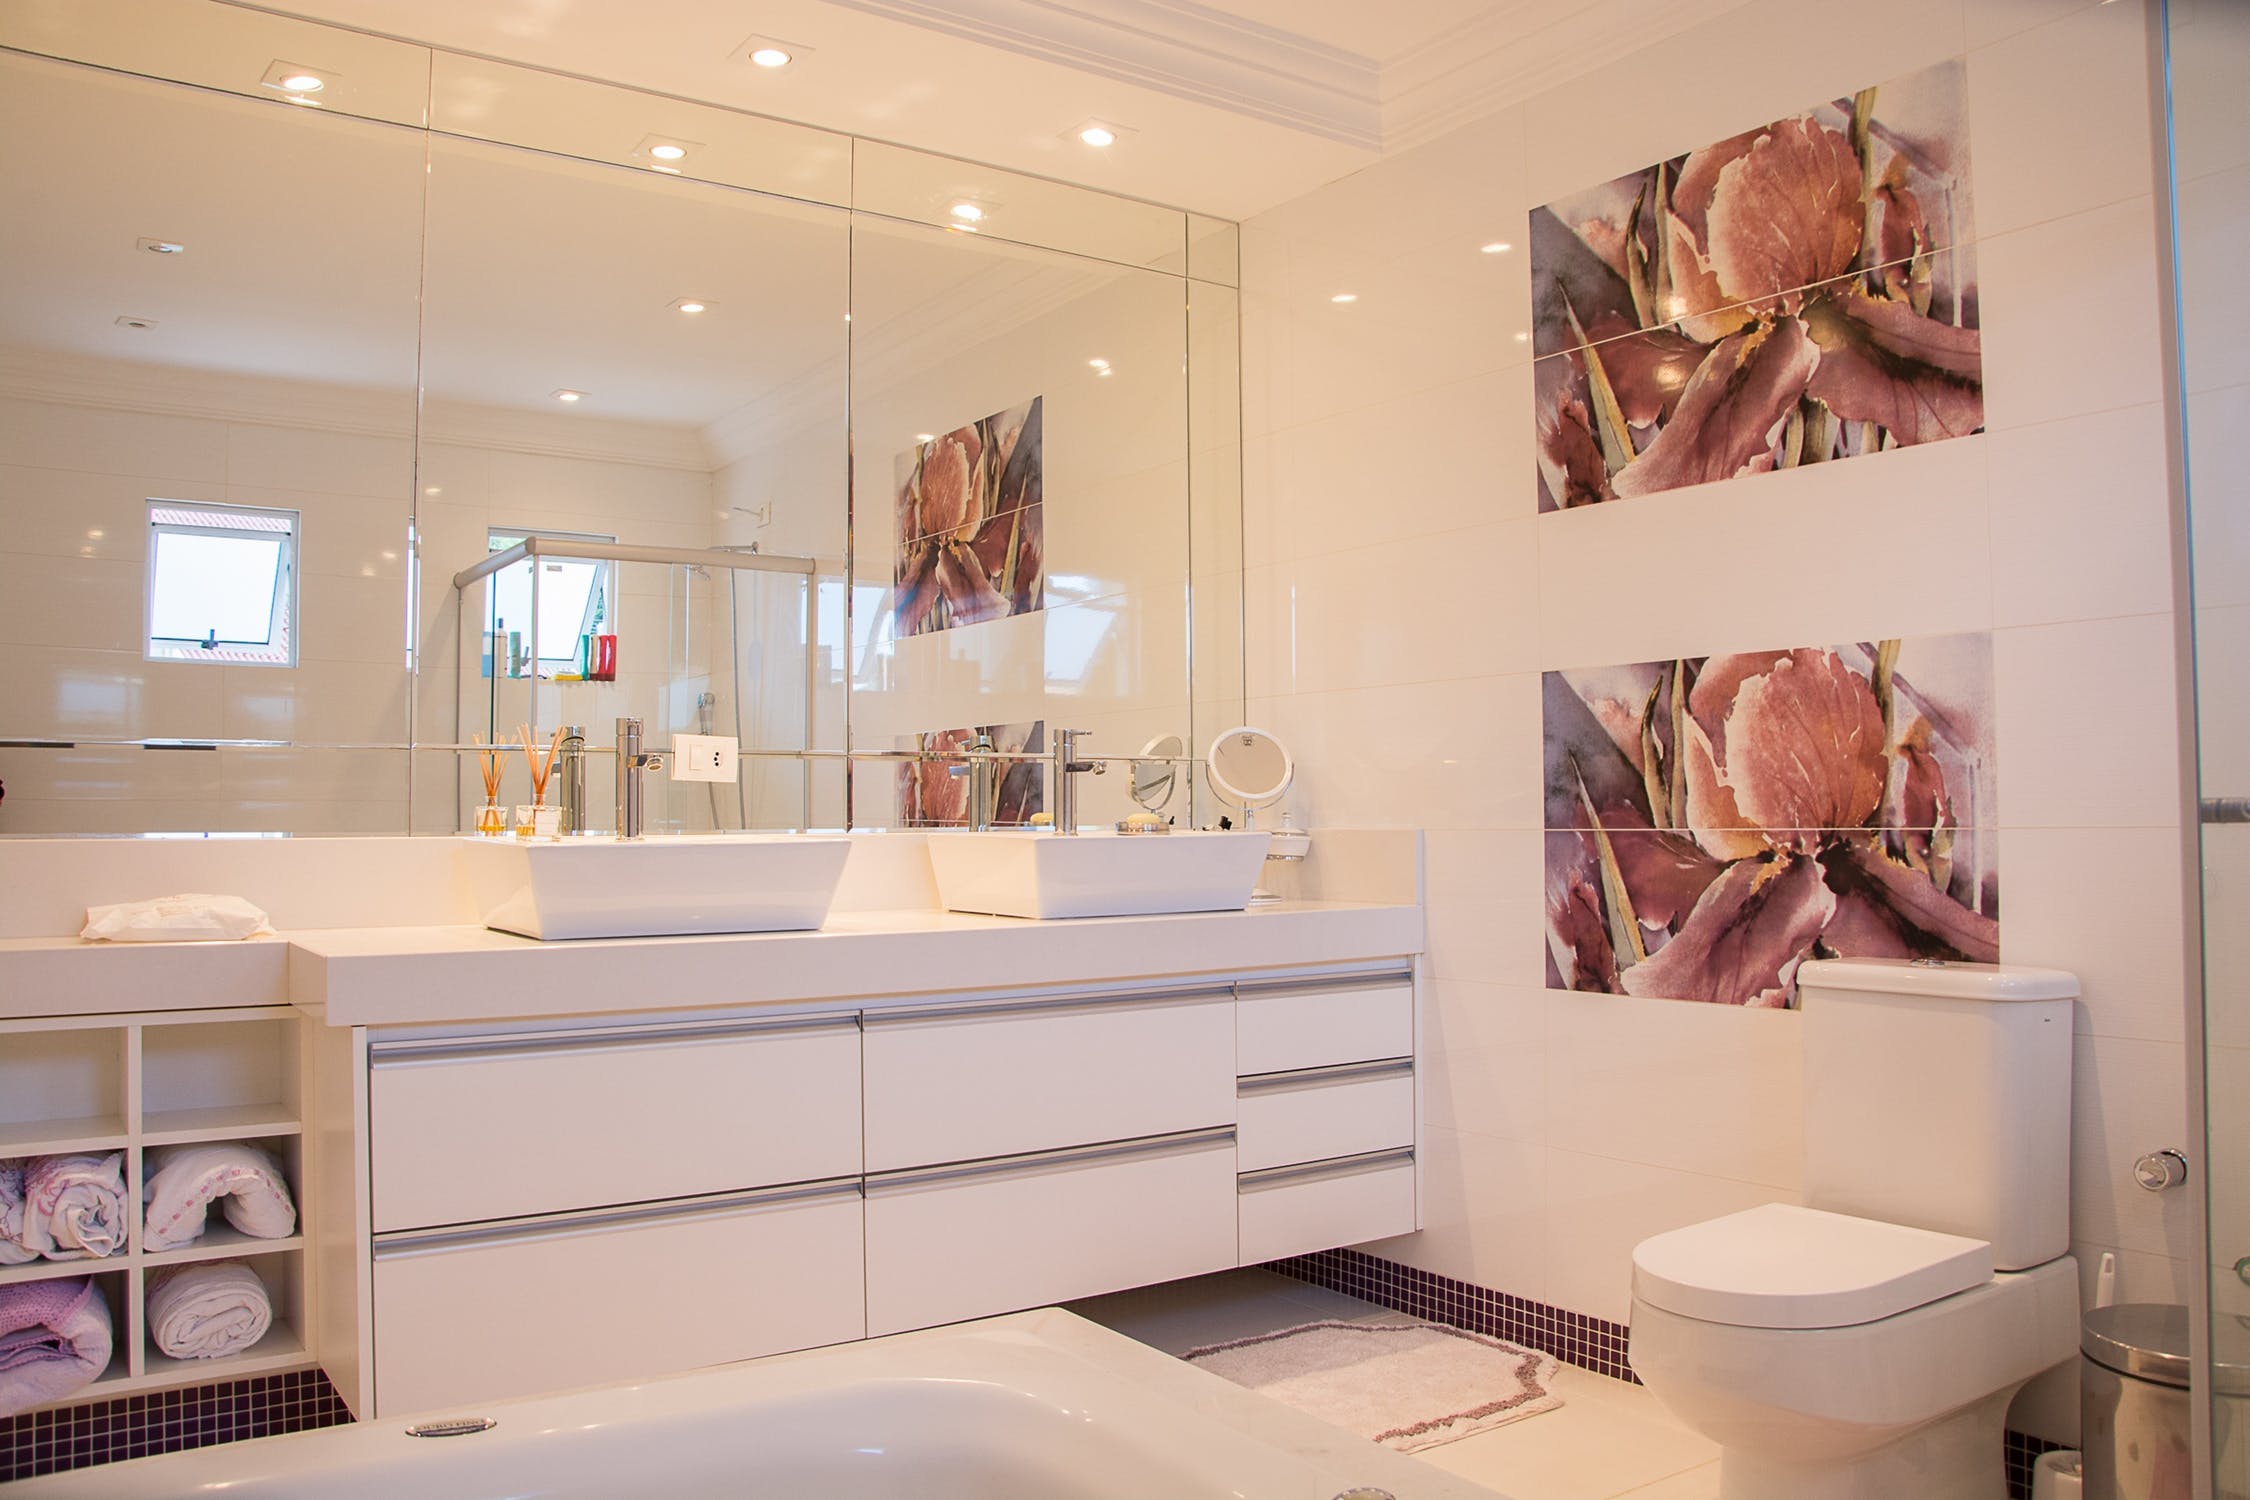 The Best Upgrades to Consider for the Bathroom